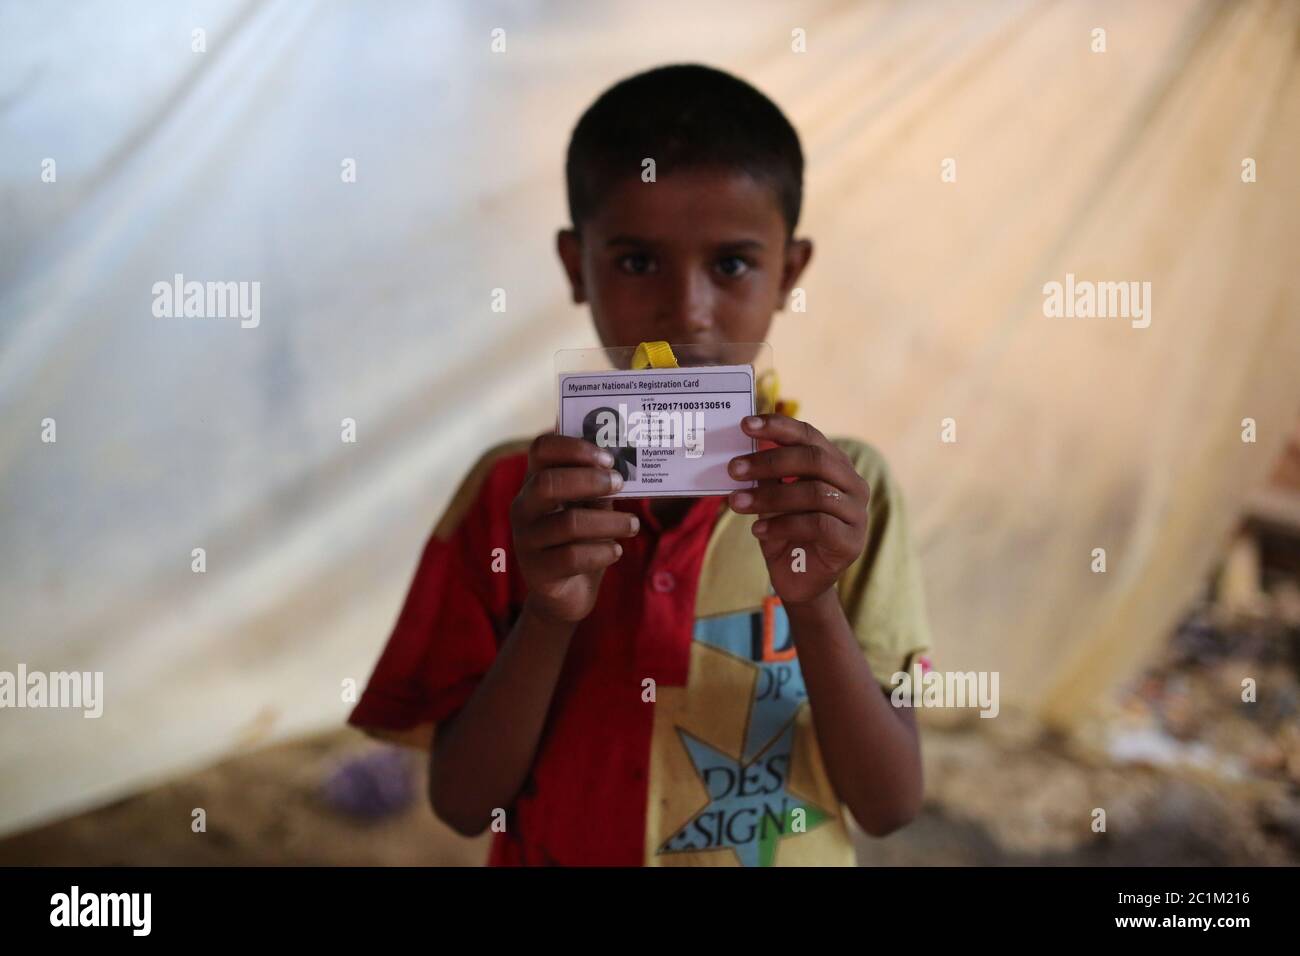 A Rohigya child show his ID card that he collect from Bangladesh at Kutupalong refugee camp, Bangladesh, Tuesday, Oct. 03, 2017. Stock Photo